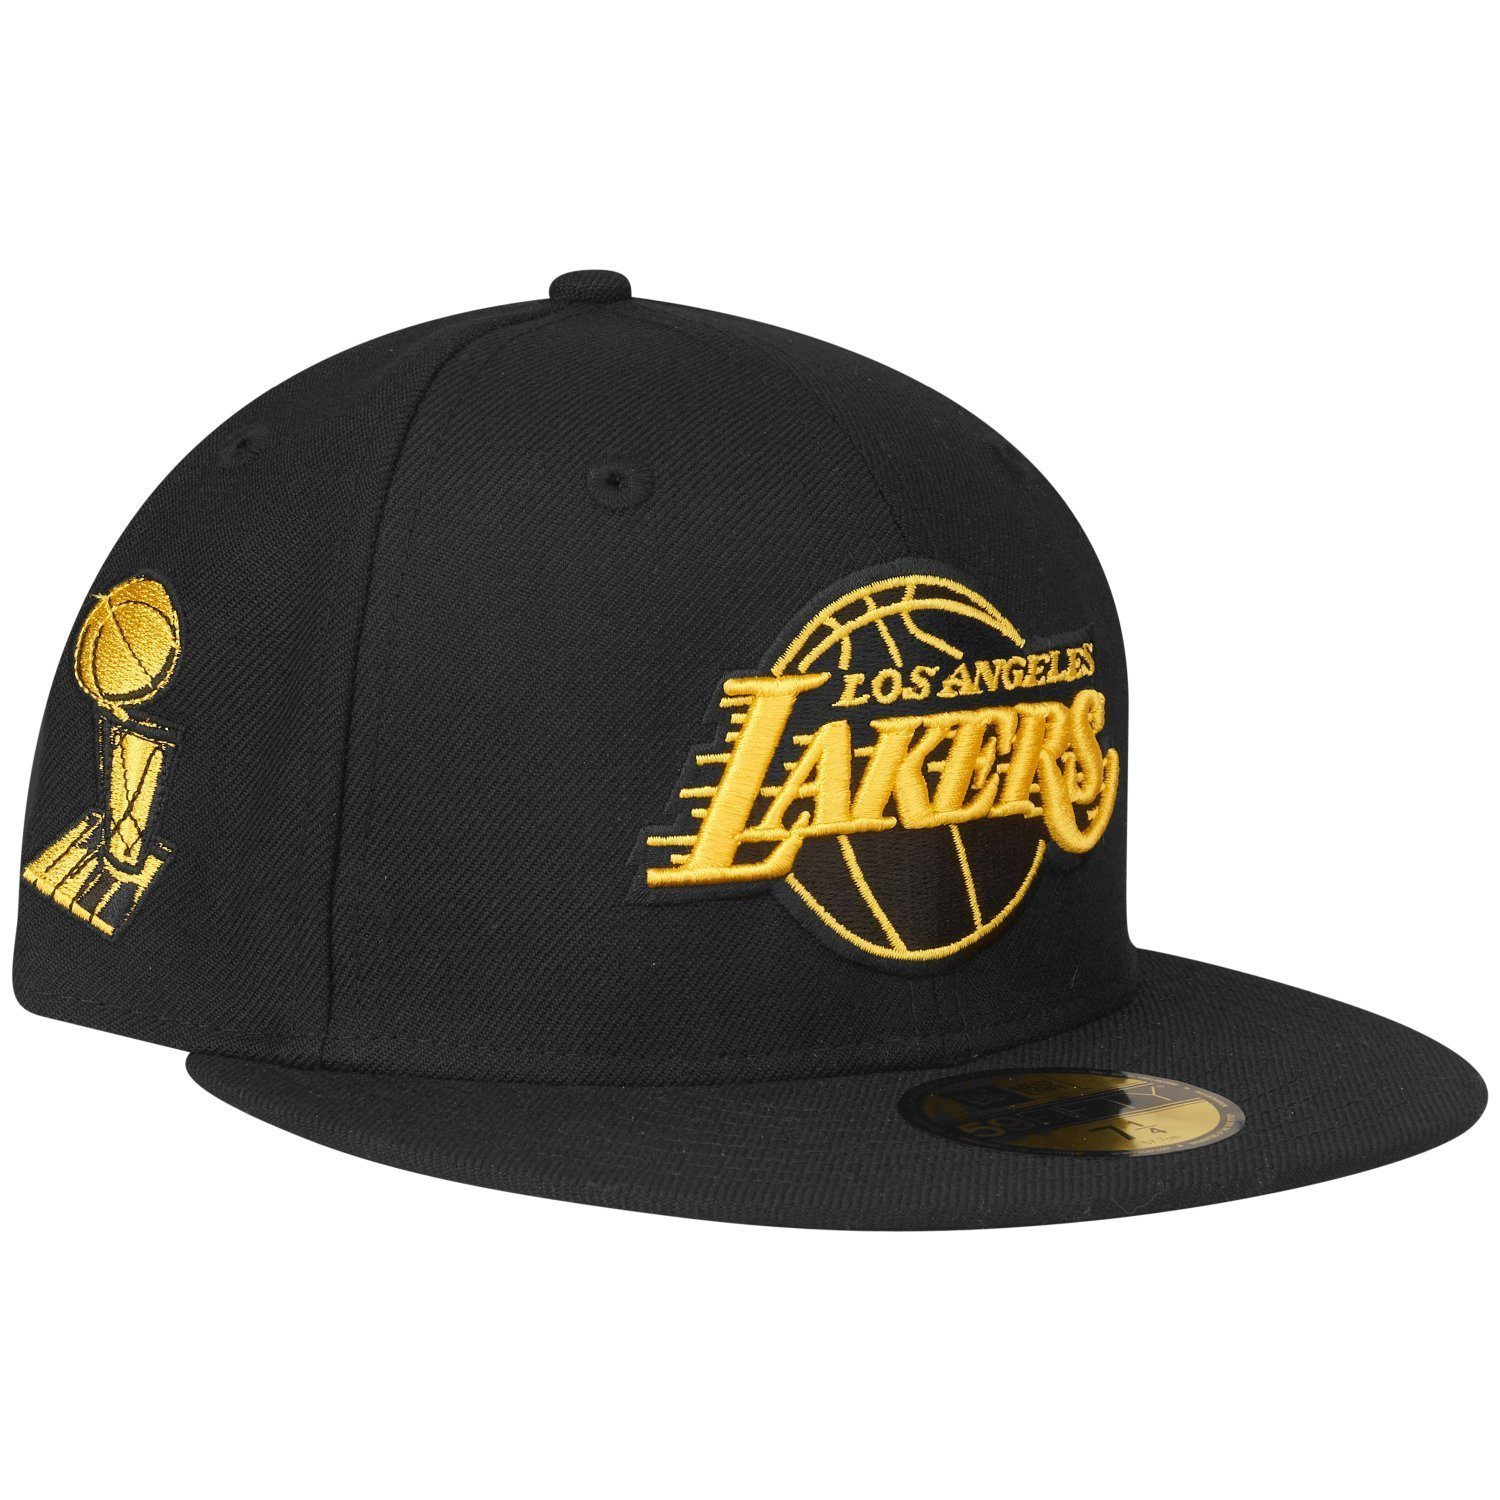 New Era Fitted Cap 59Fifty NBA CHAMPS Los Angeles Lakers